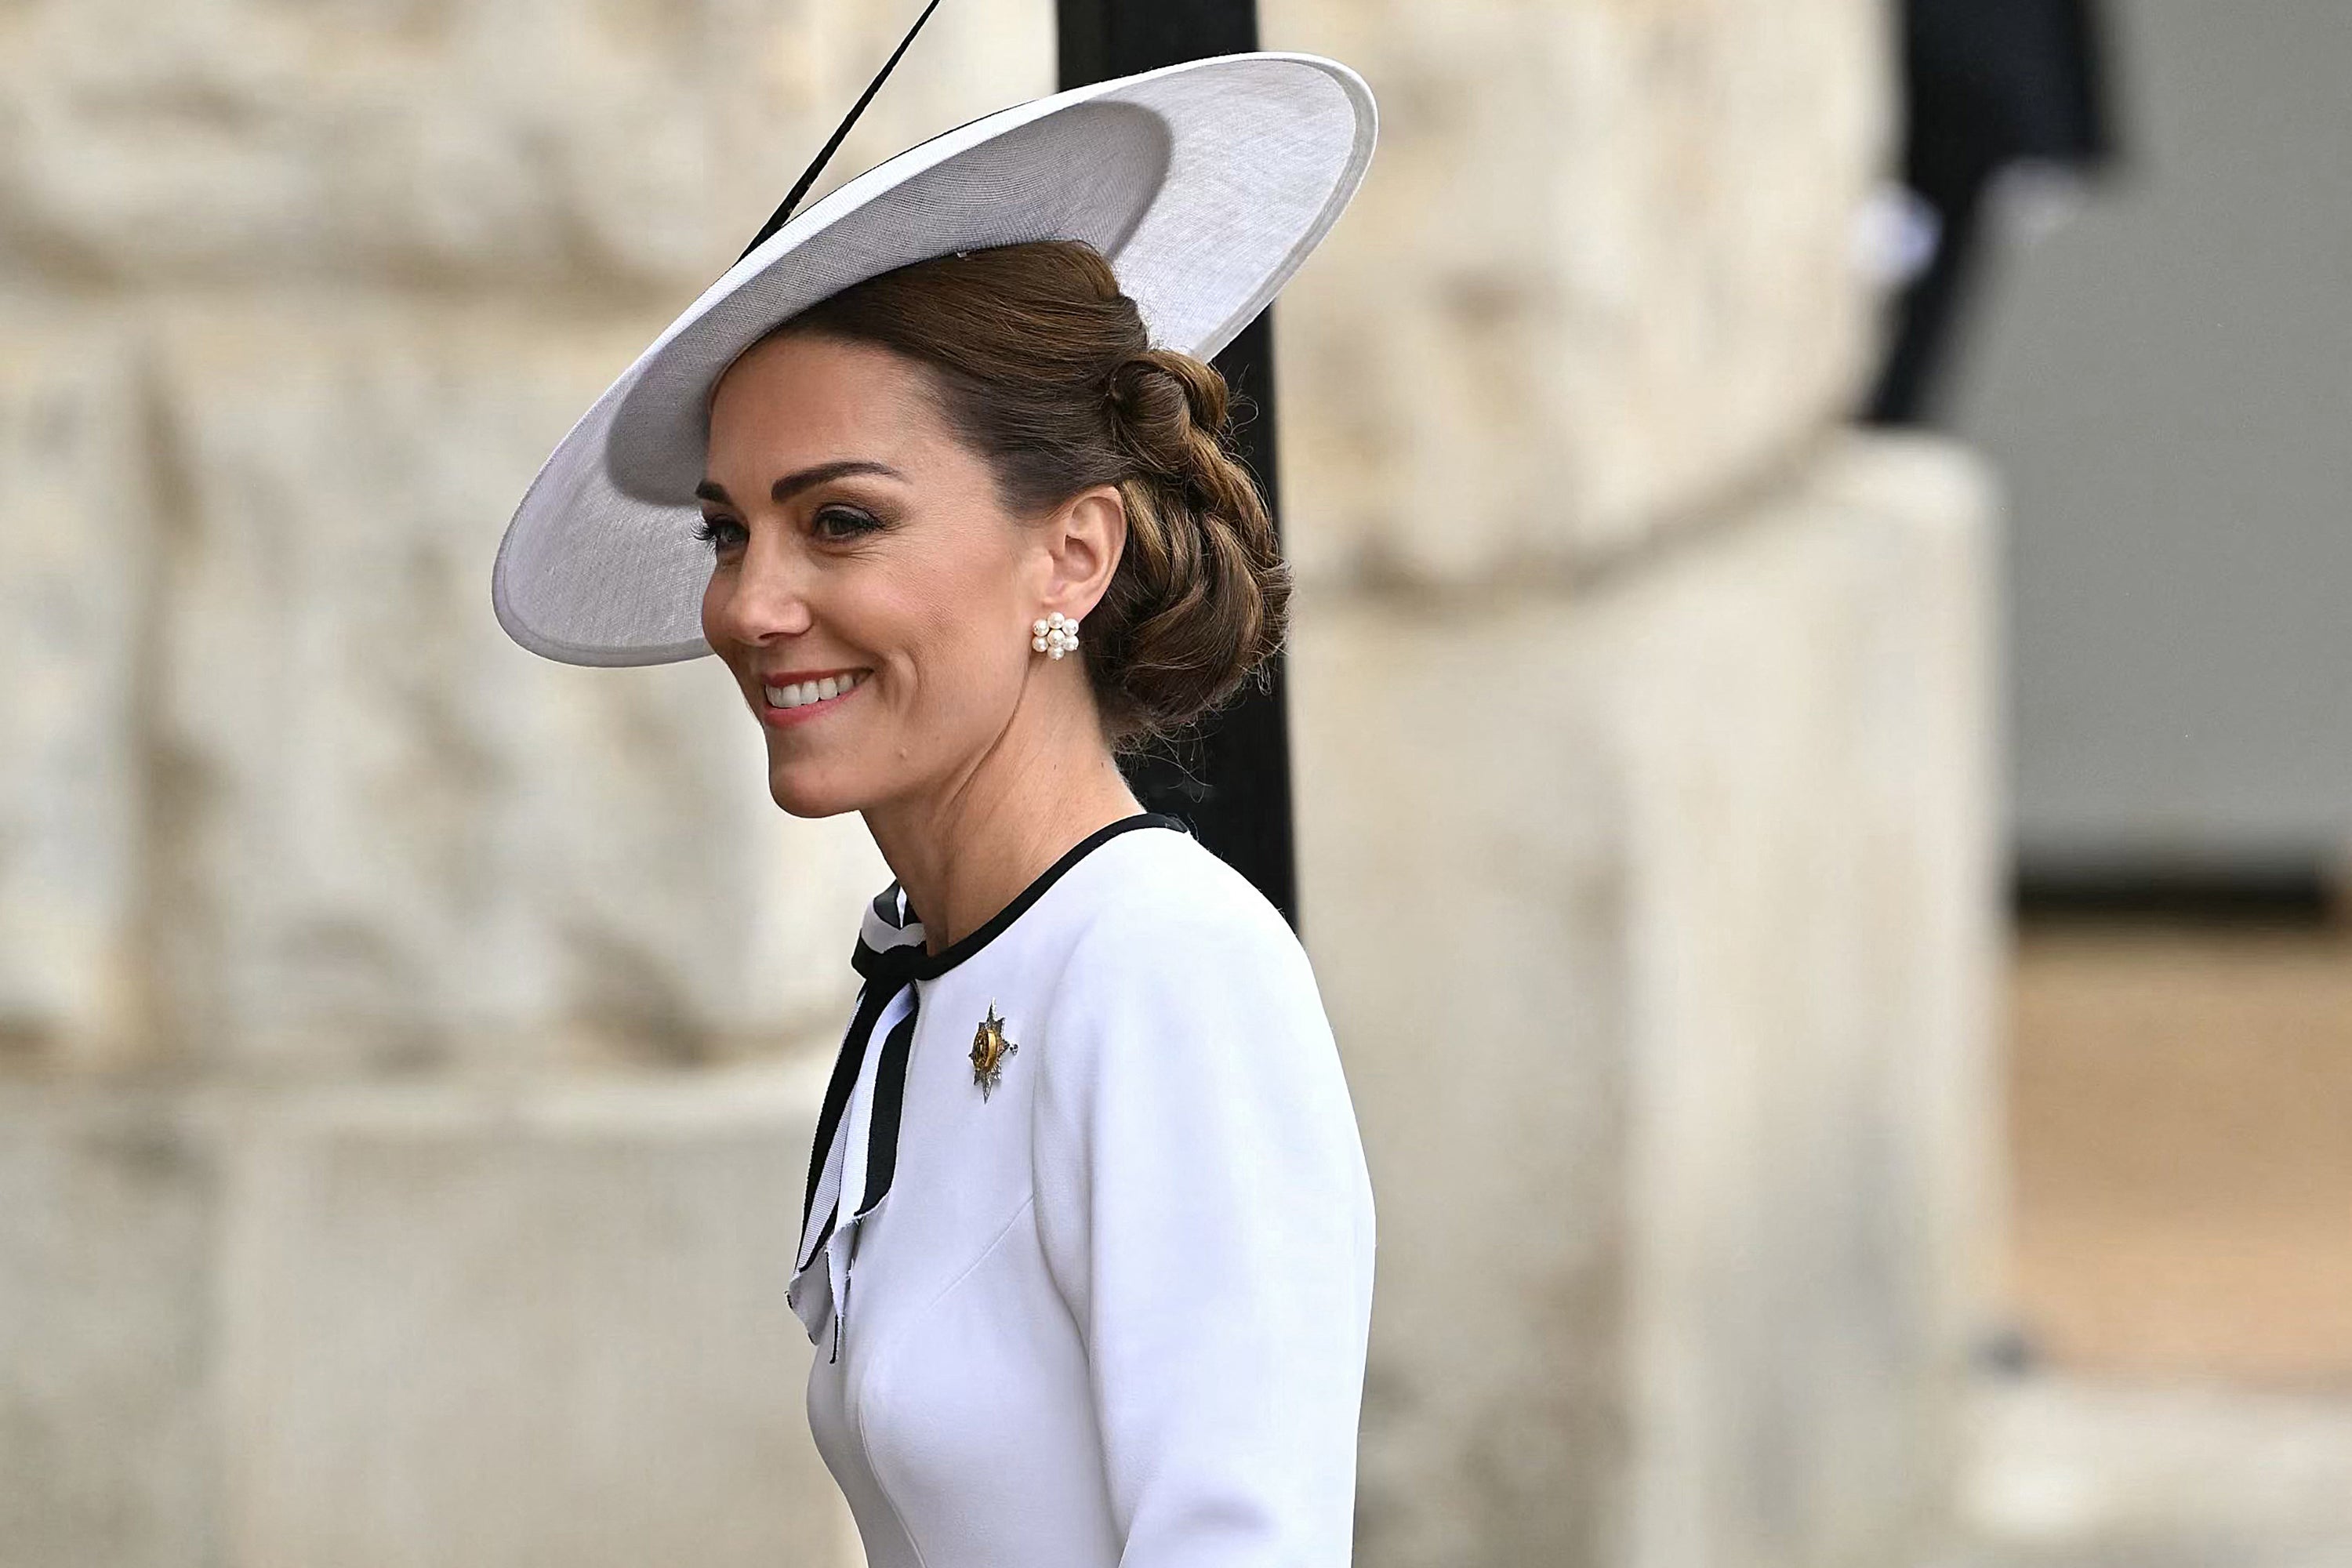 Kate beamed as she took part in the parade